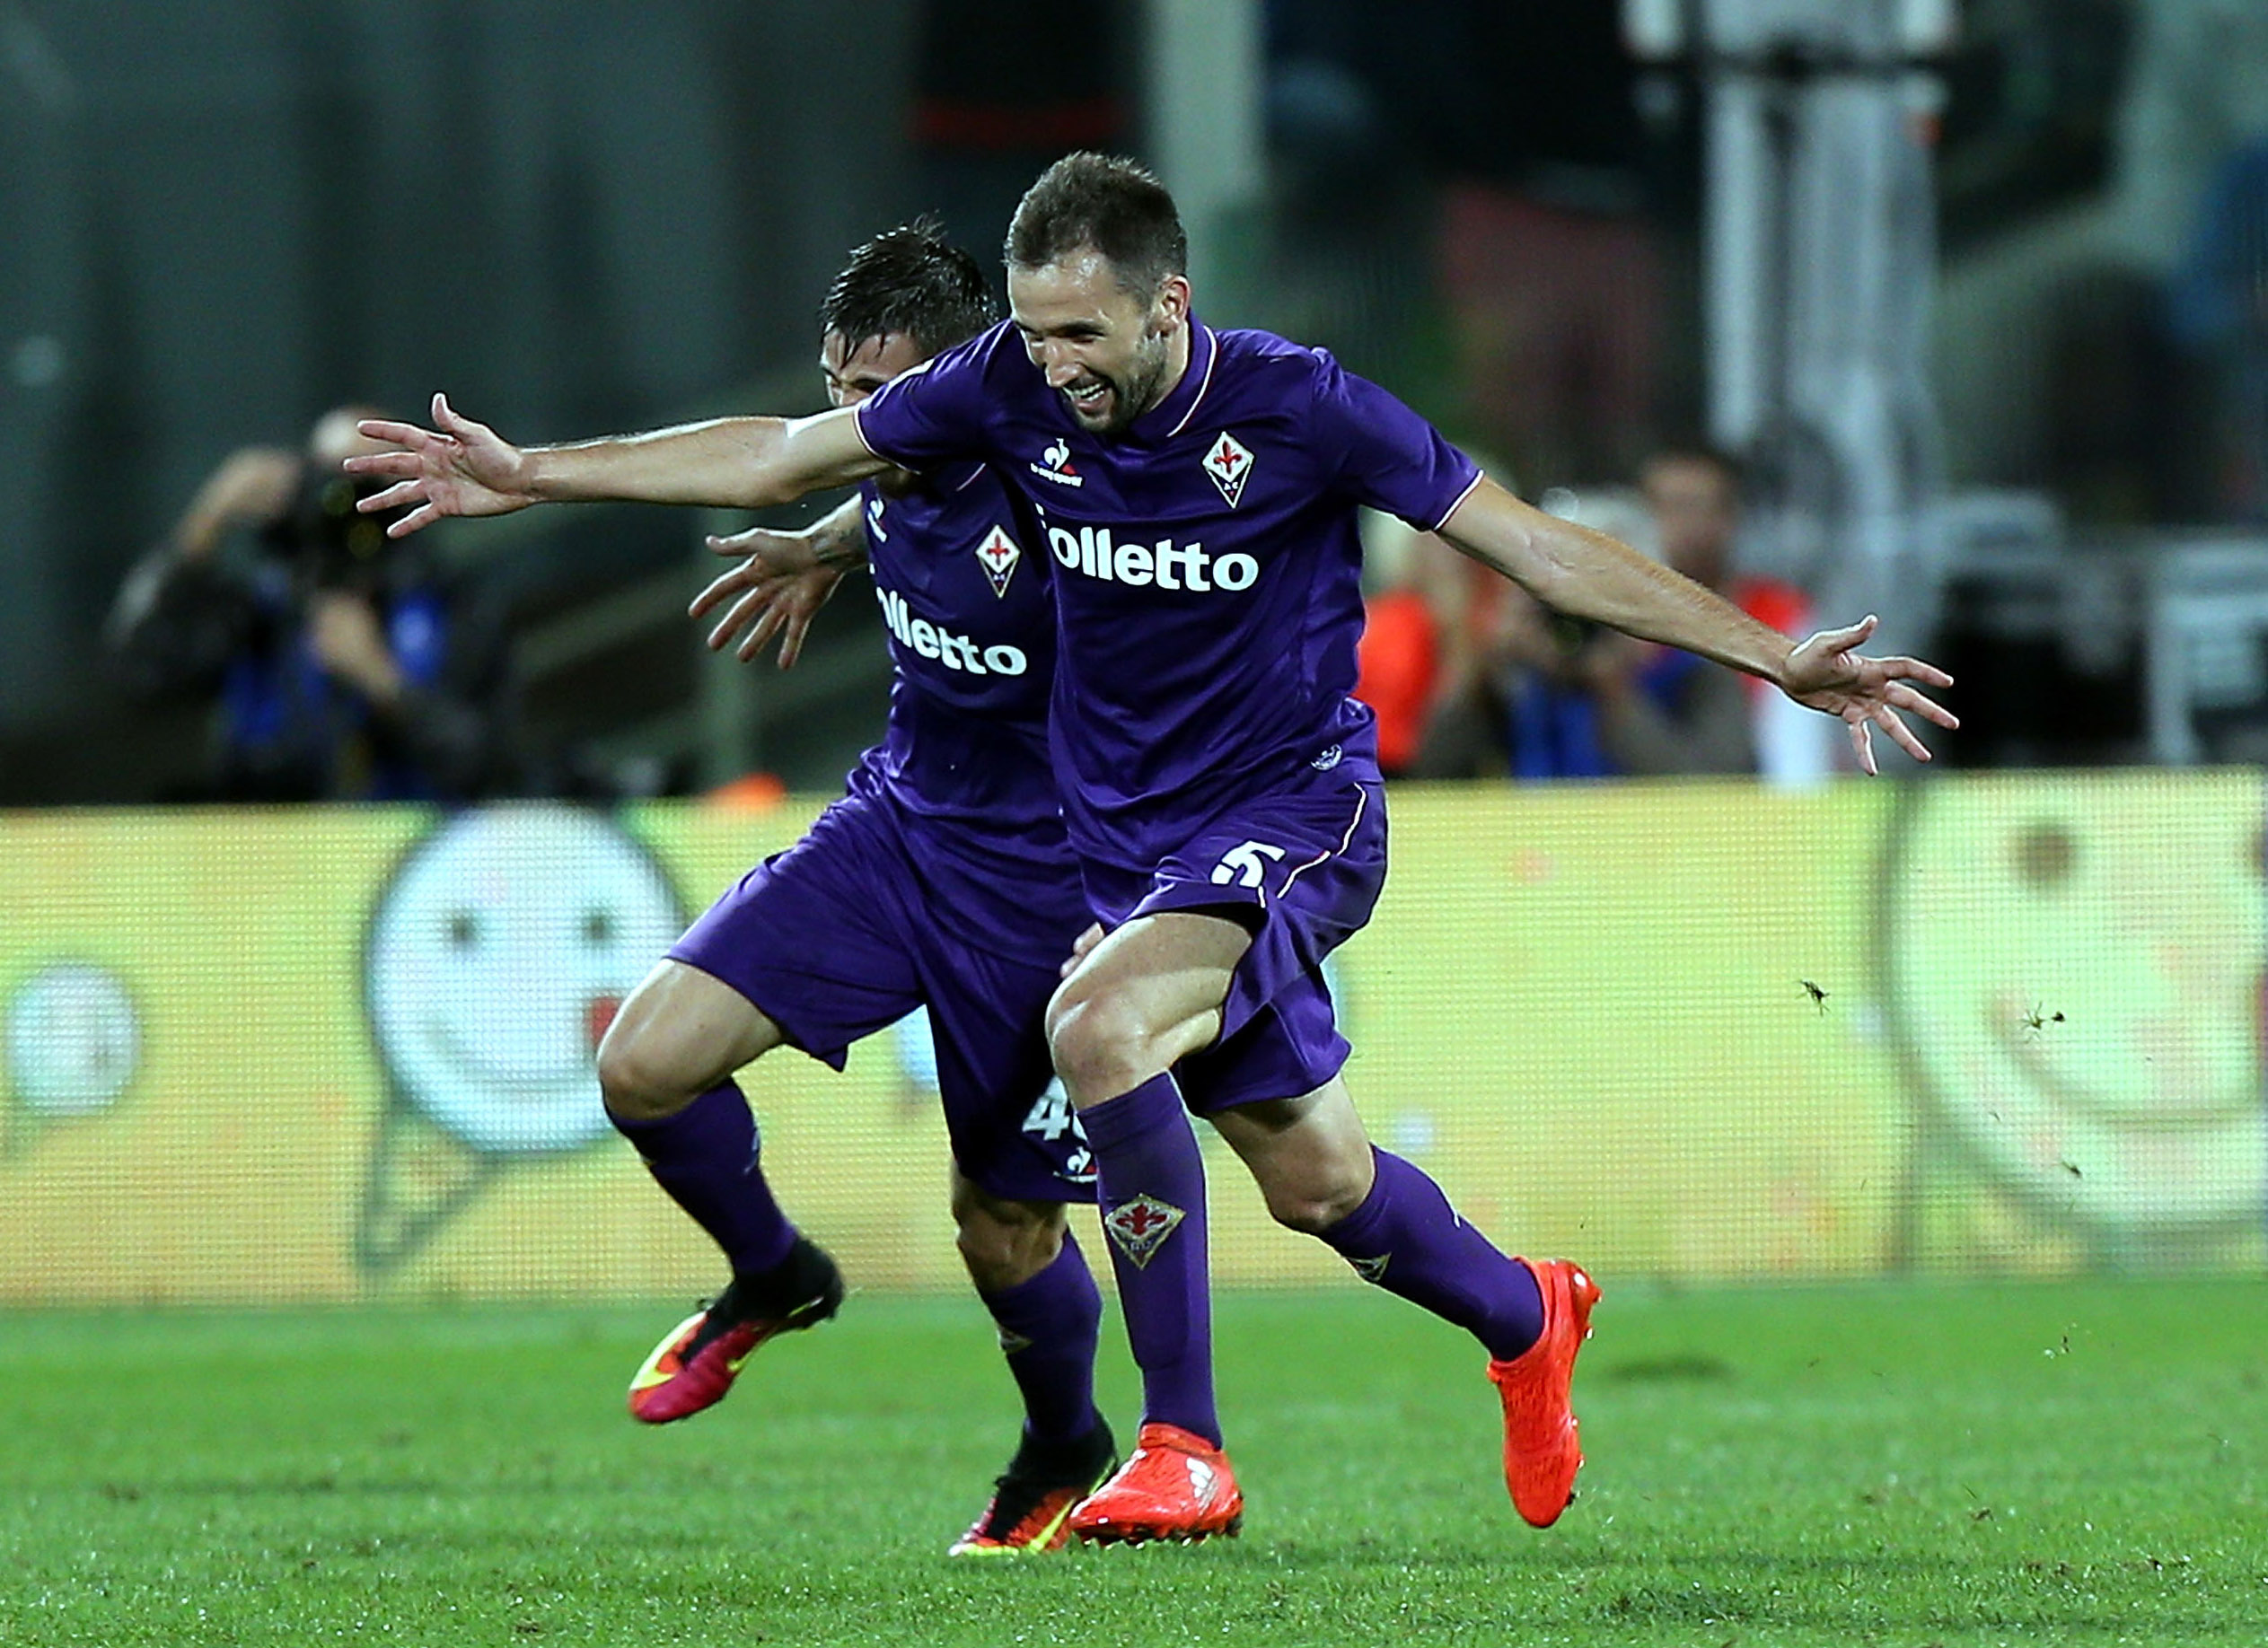 FLORENCE, ITALY - SEPTEMBER 18: Milan Badelj of ACF Fiorentina celebrates after scoring a goal during the Serie A match between ACF Fiorentina and AS Roma at Stadio Artemio Franchi on September 18, 2016 in Florence, Italy.  (Photo by Gabriele Maltinti/Getty Images)